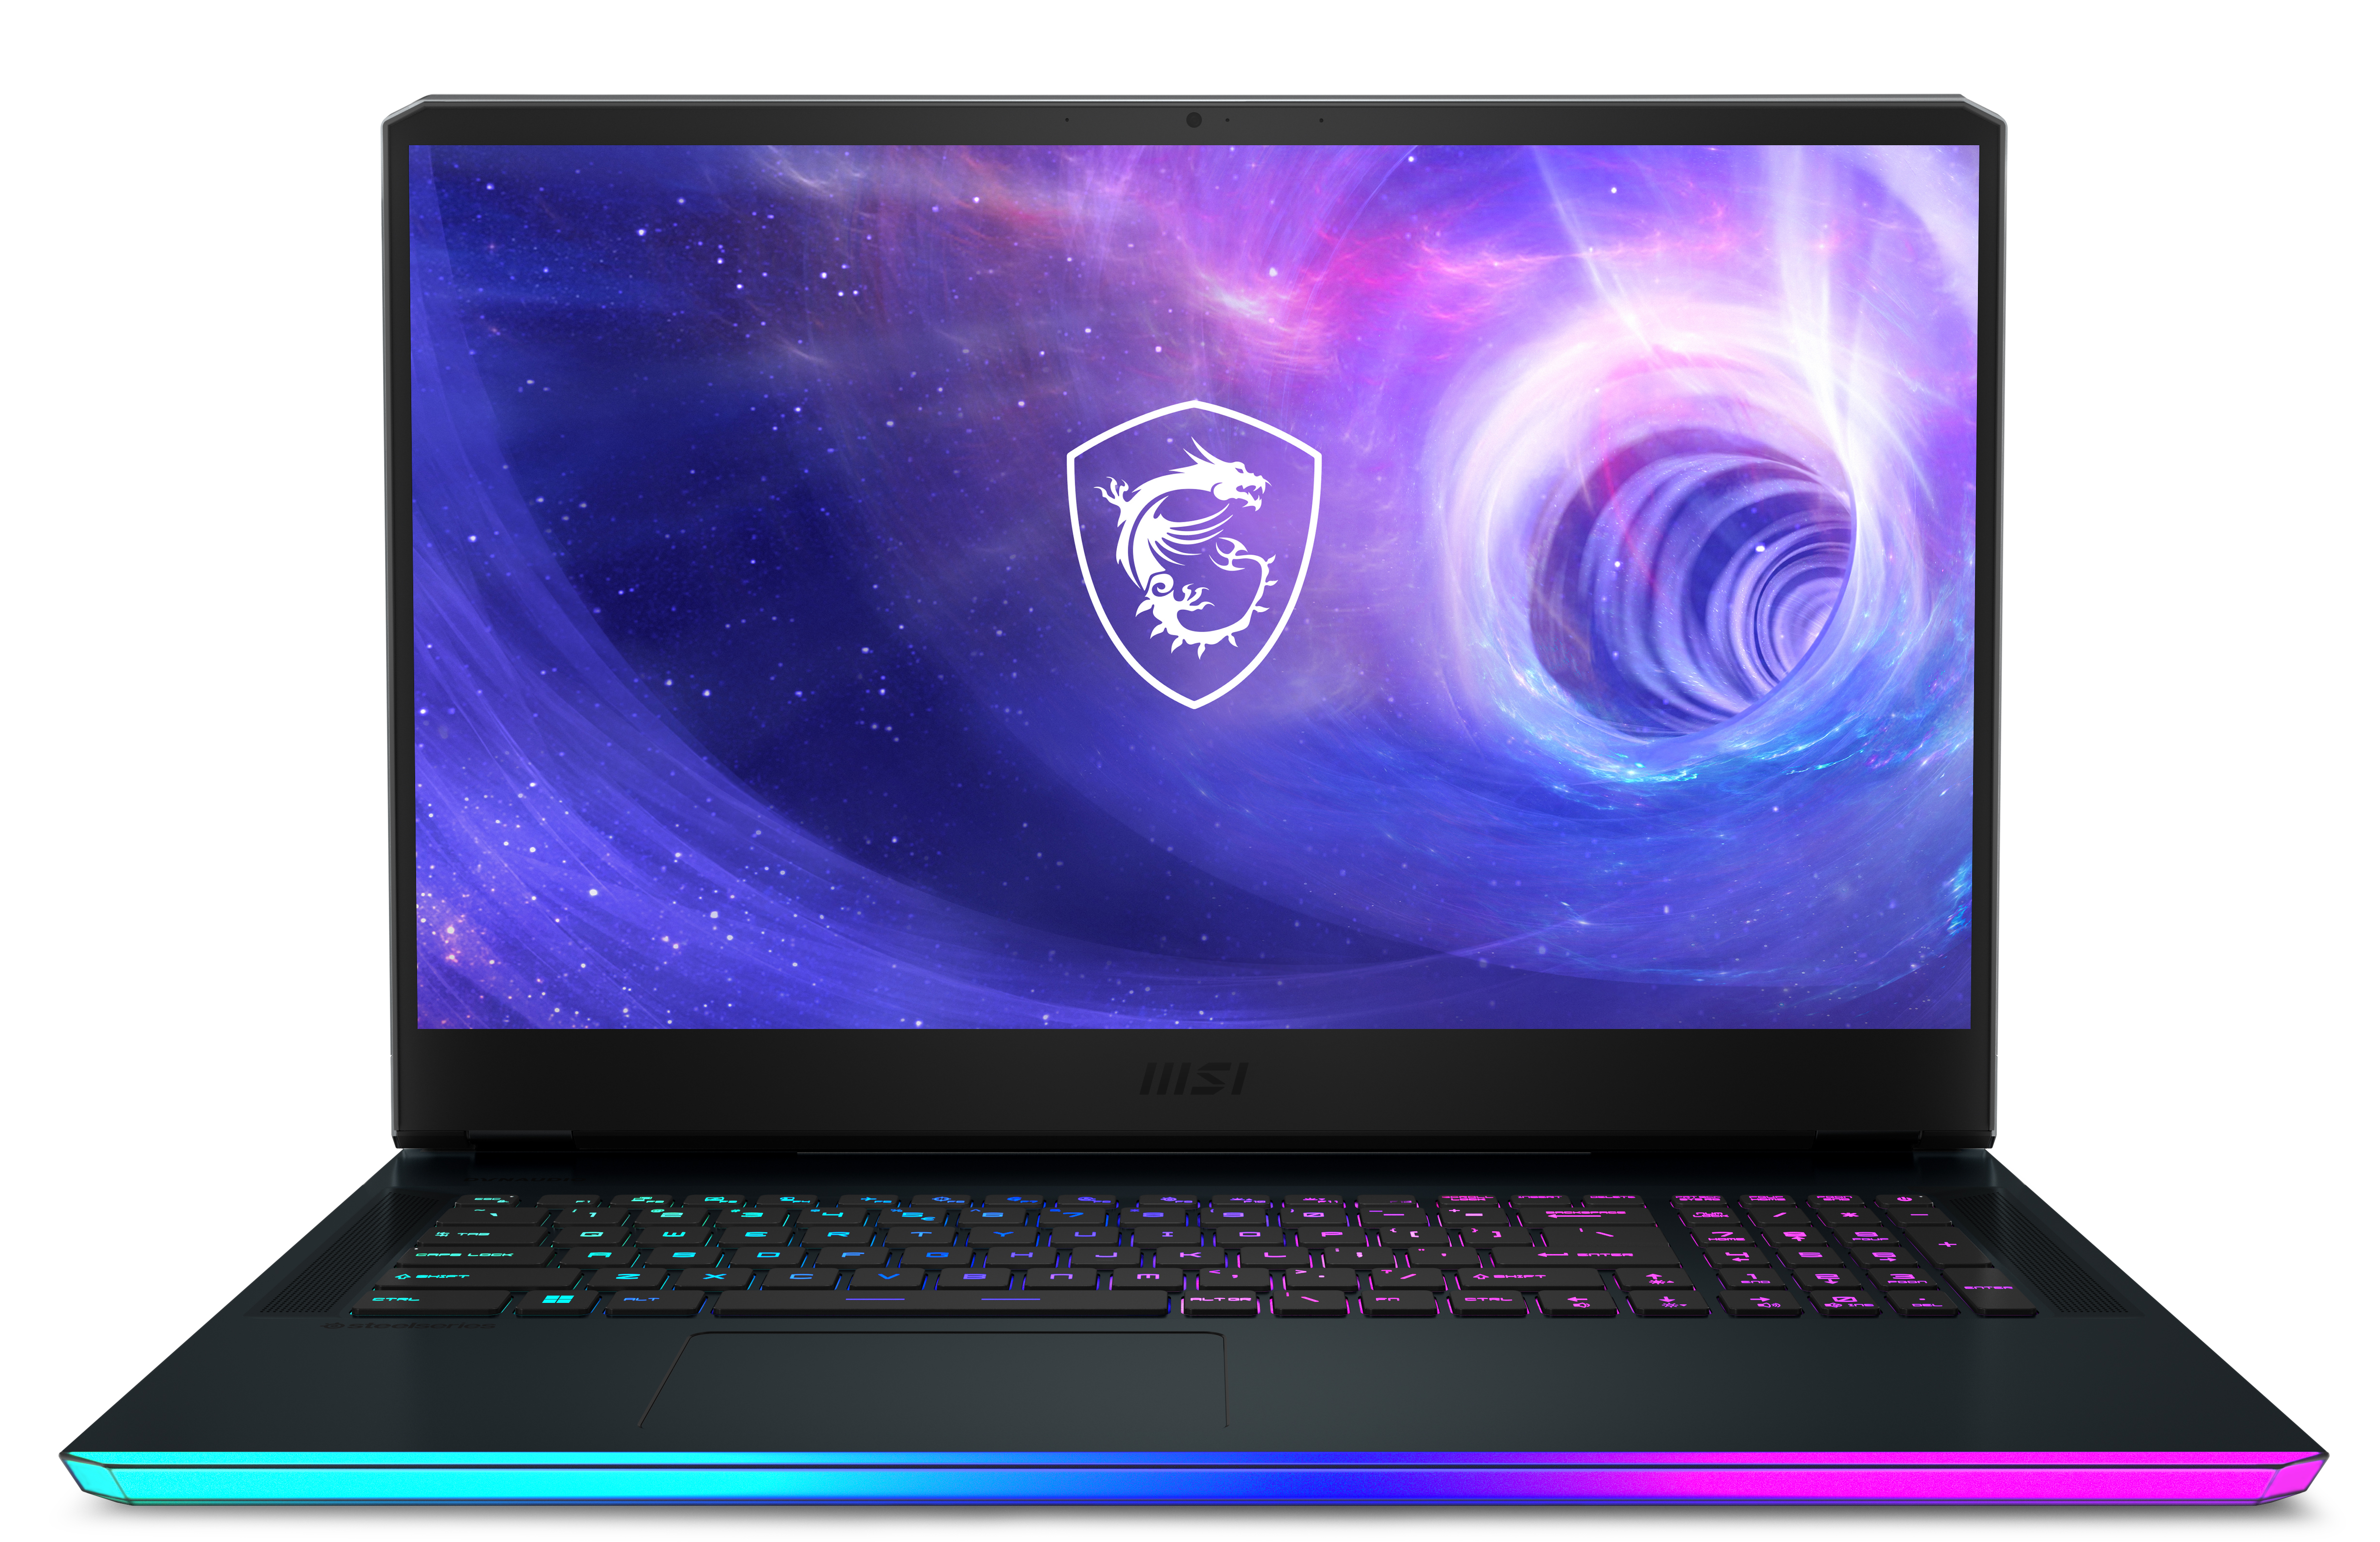 Msi 2022 Schedule Ces 2022: Msi Launches Alder Lake Laptop Lineup